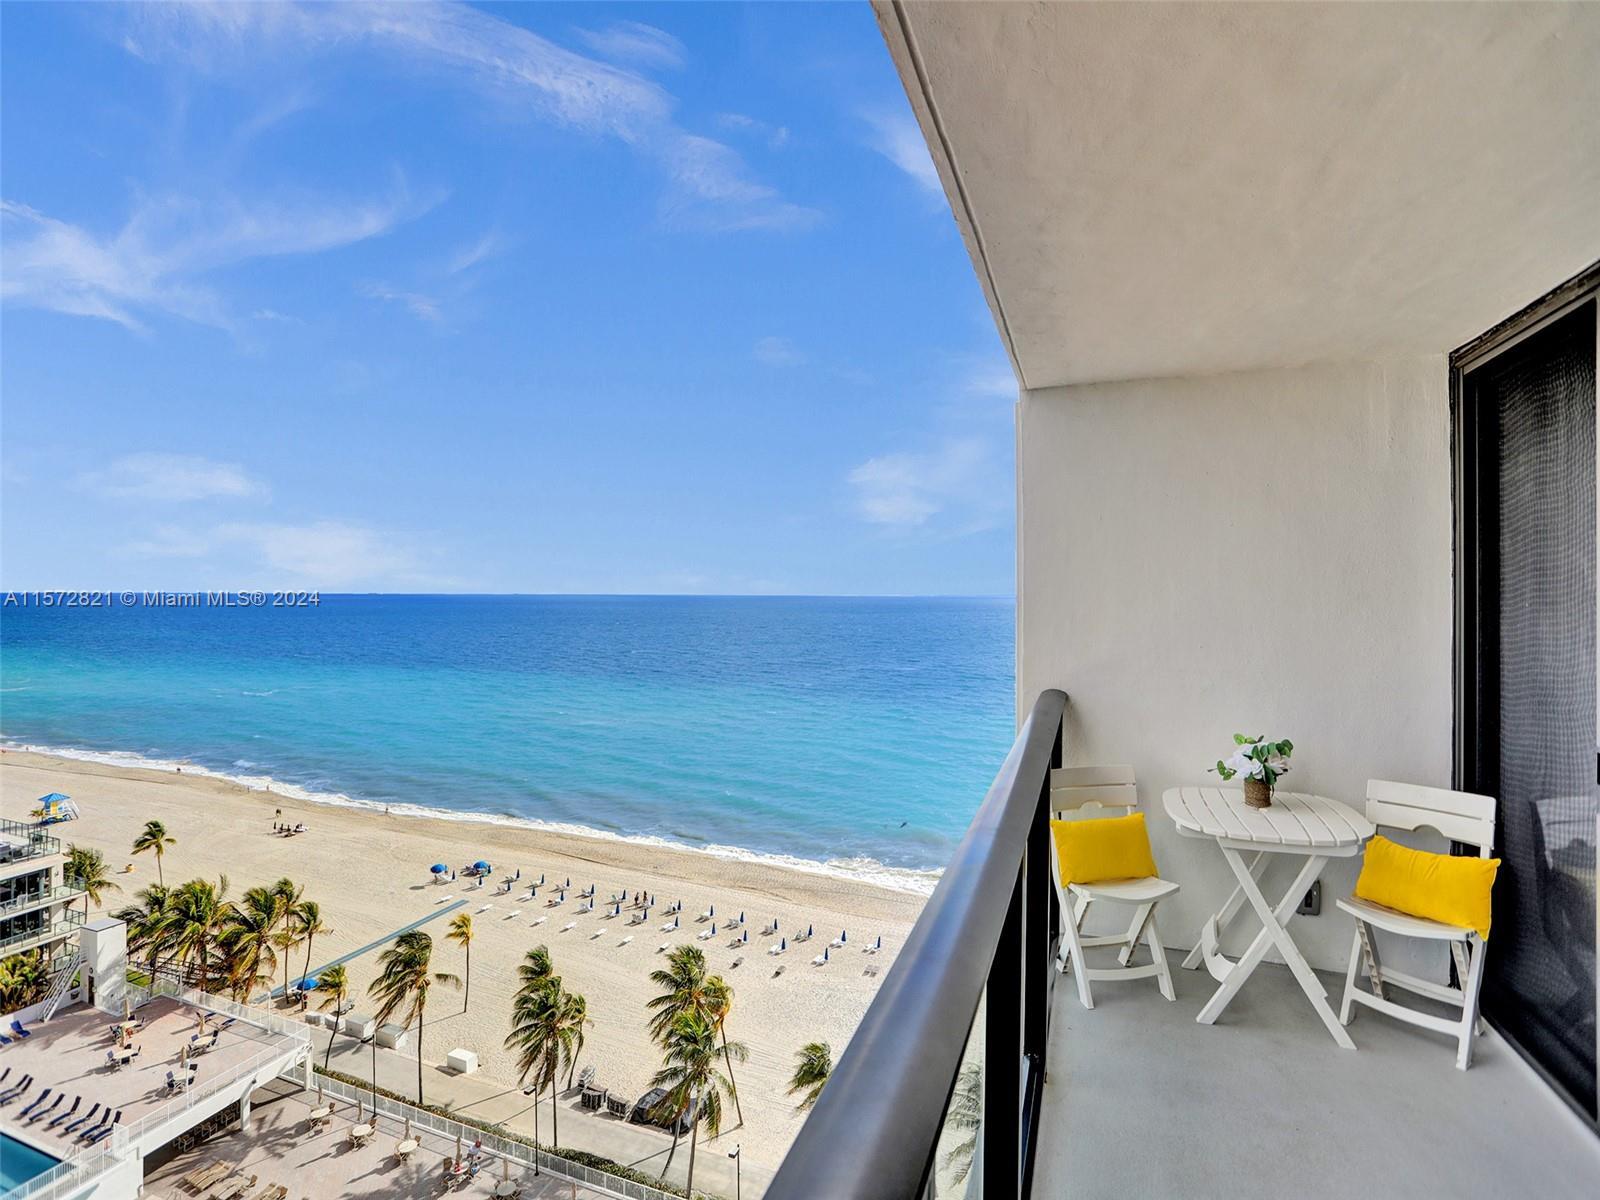 This sounds like a dreamy spot! A spacious 2-bedroom condo with stunning ocean and city skyline view